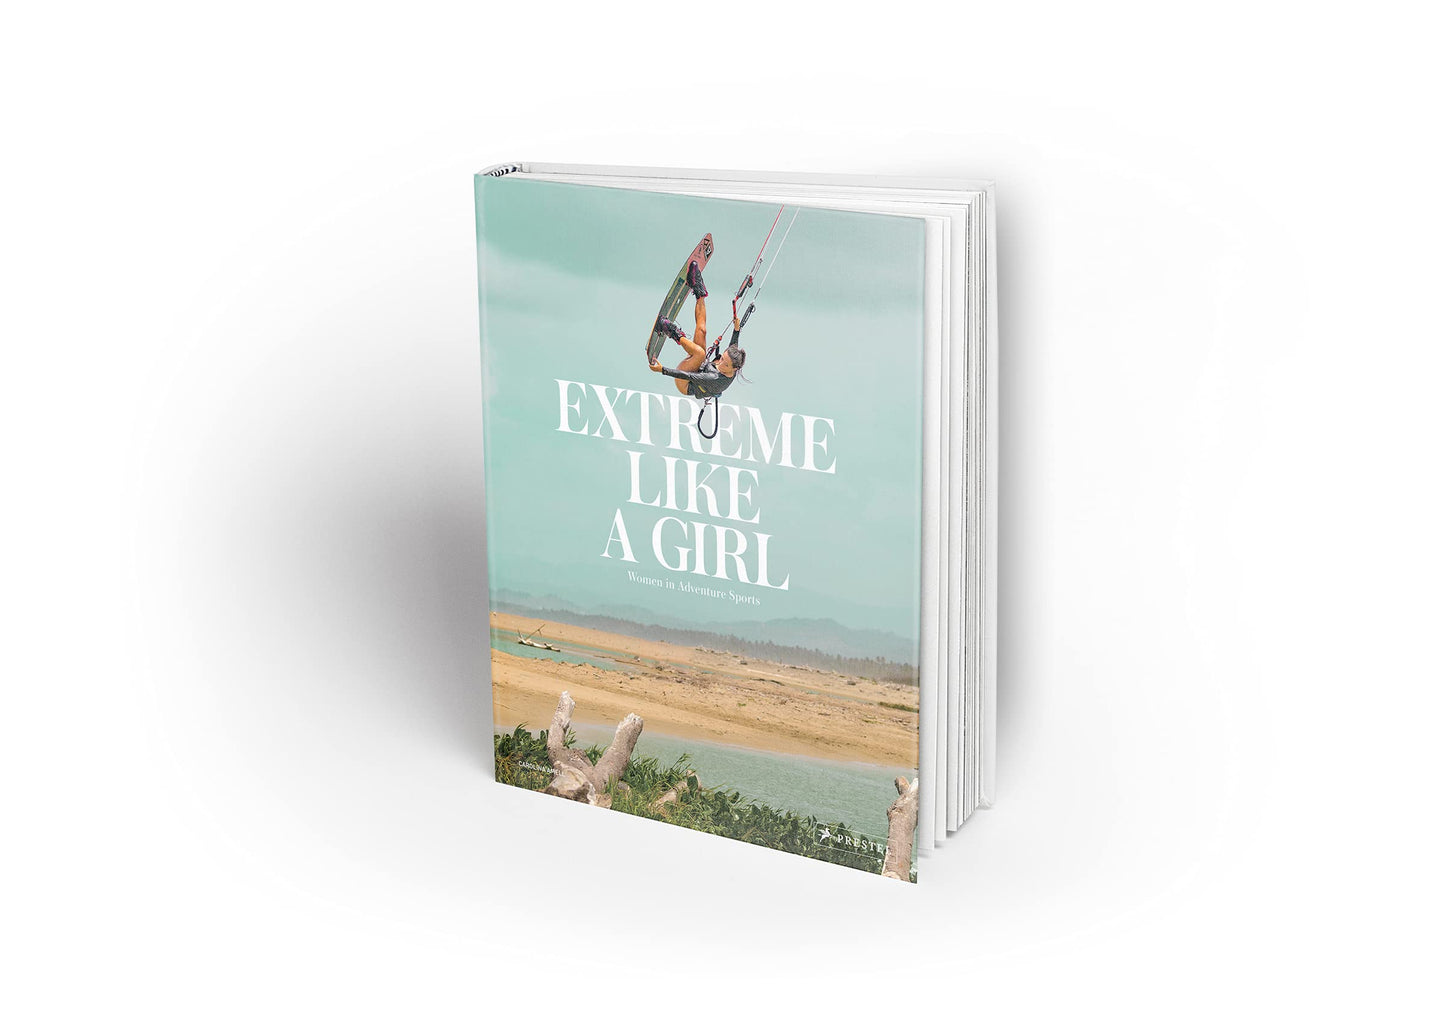 Extreme Like a Girl - Women in Adventure Sports